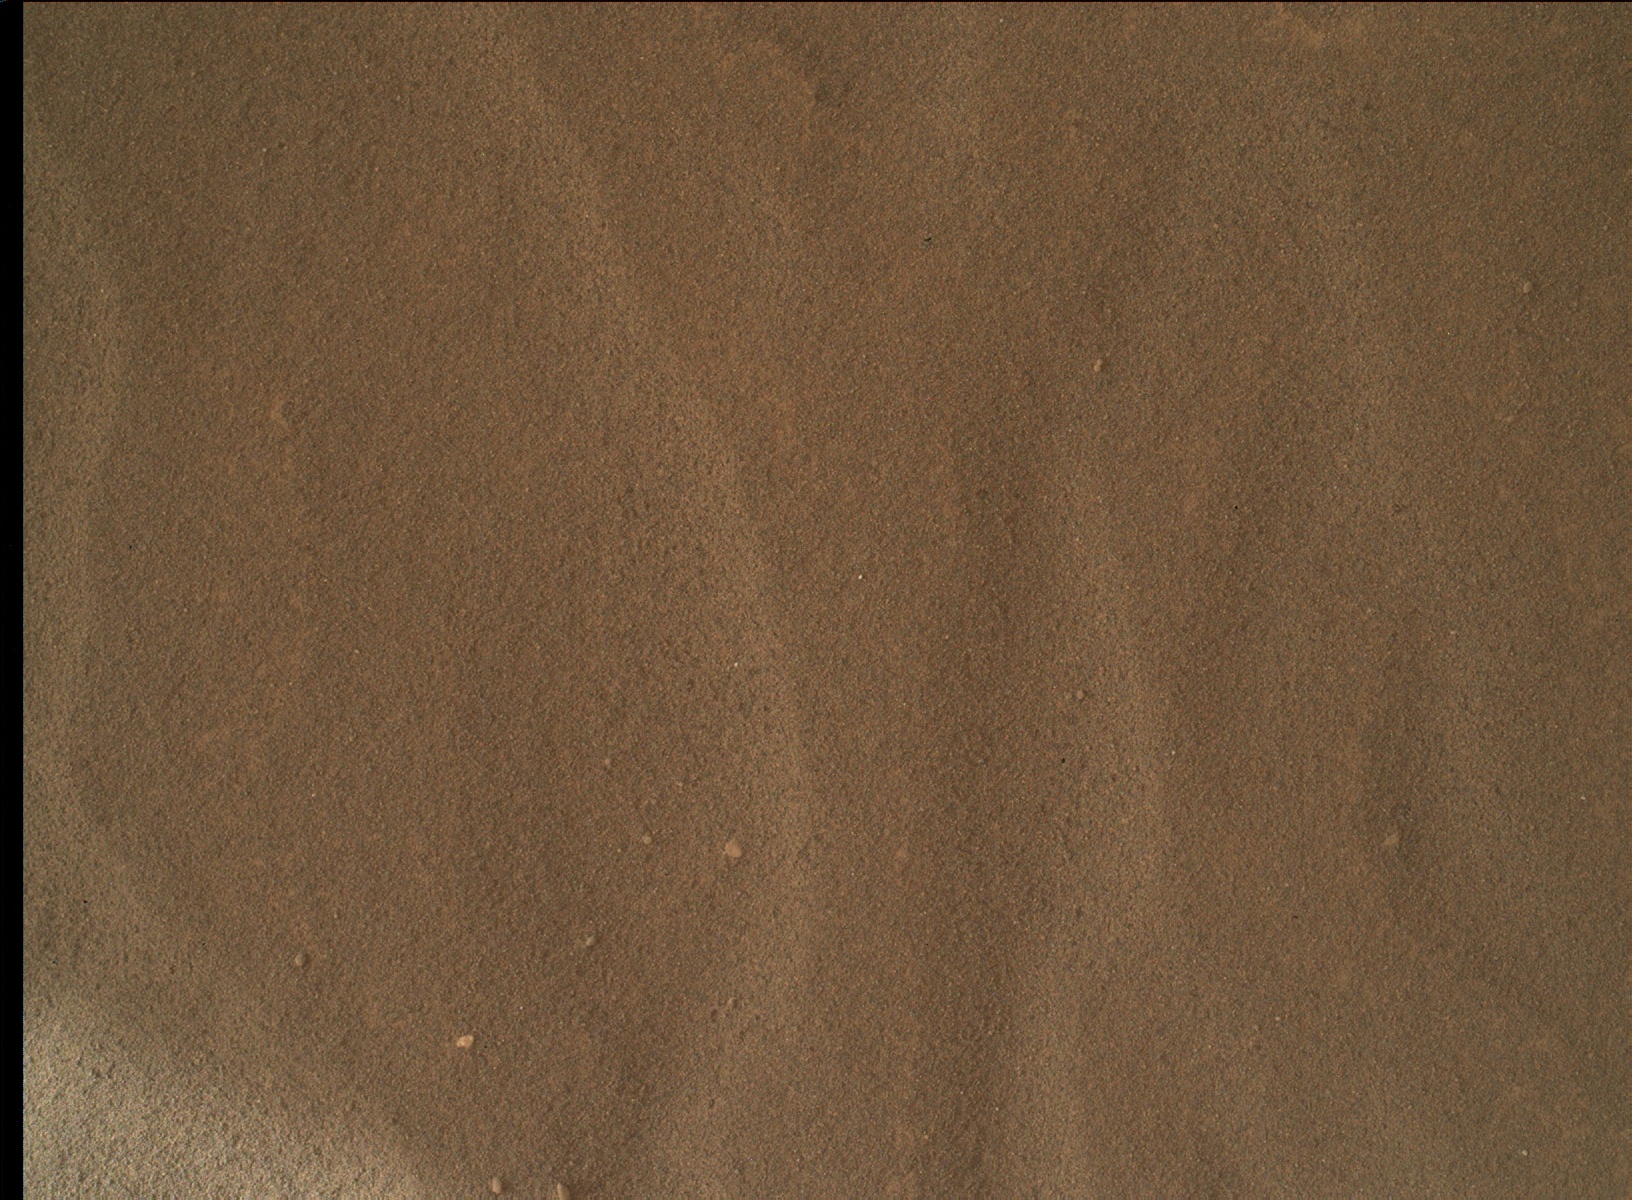 Nasa's Mars rover Curiosity acquired this image using its Mars Hand Lens Imager (MAHLI) on Sol 2731